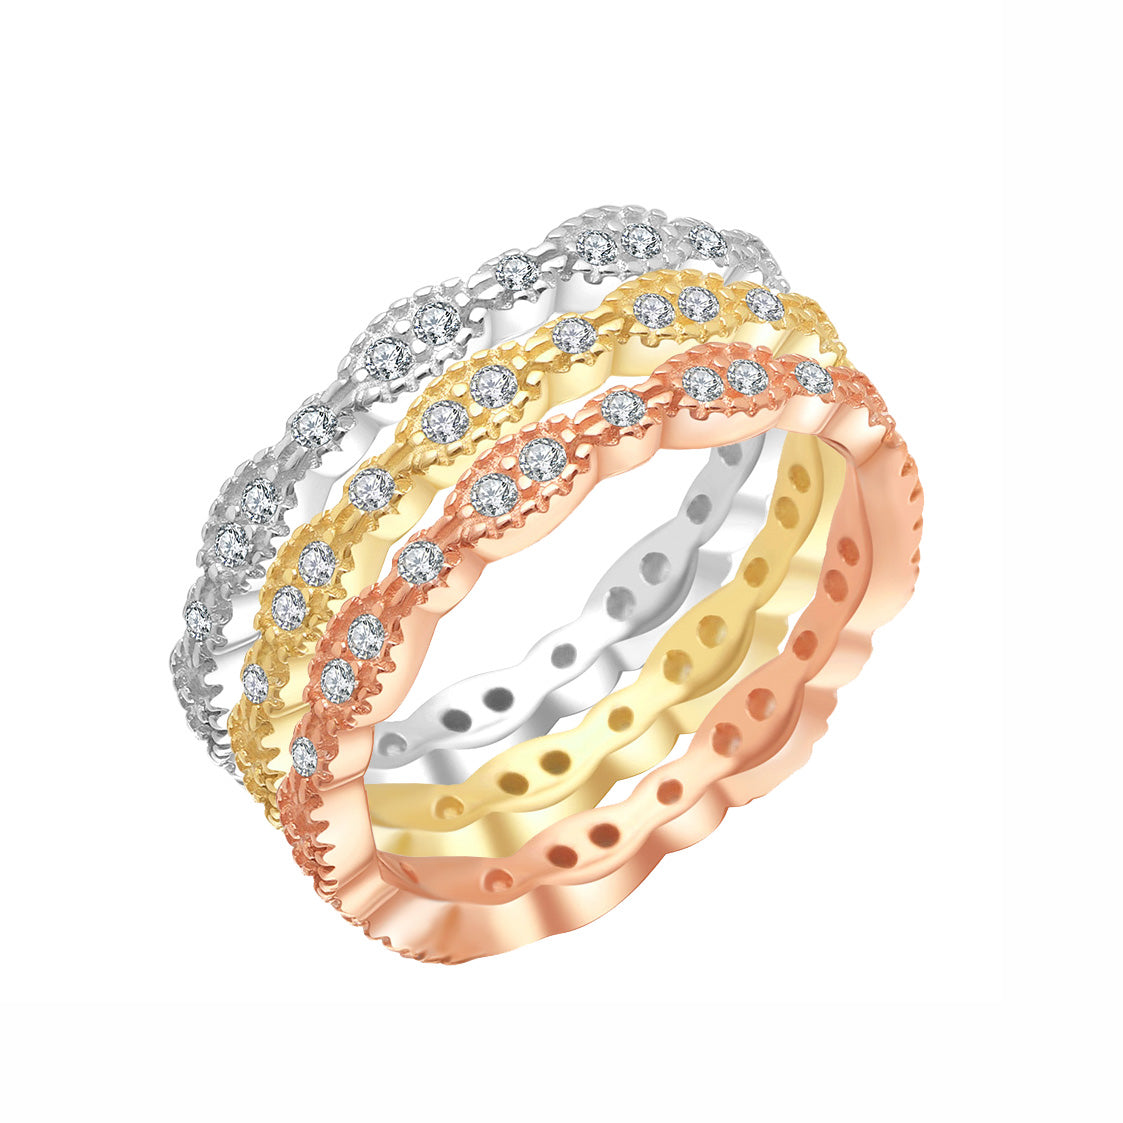 Eternity Wedding Band Ring Set Sterling Silver Cz Womens Ginger Lyne - Scallop-3 Color Set,10